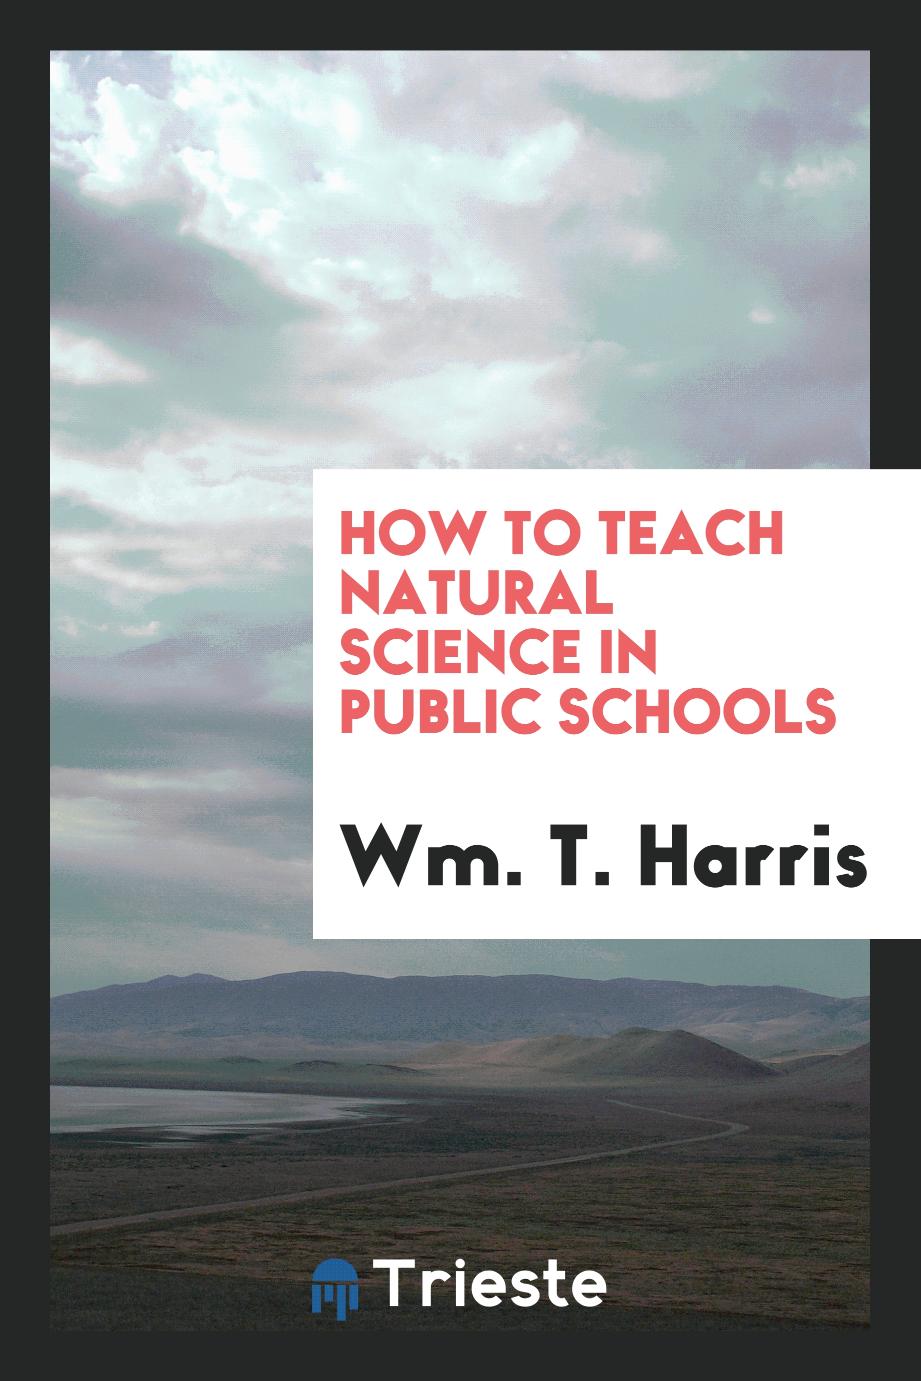 How to teach natural science in public schools